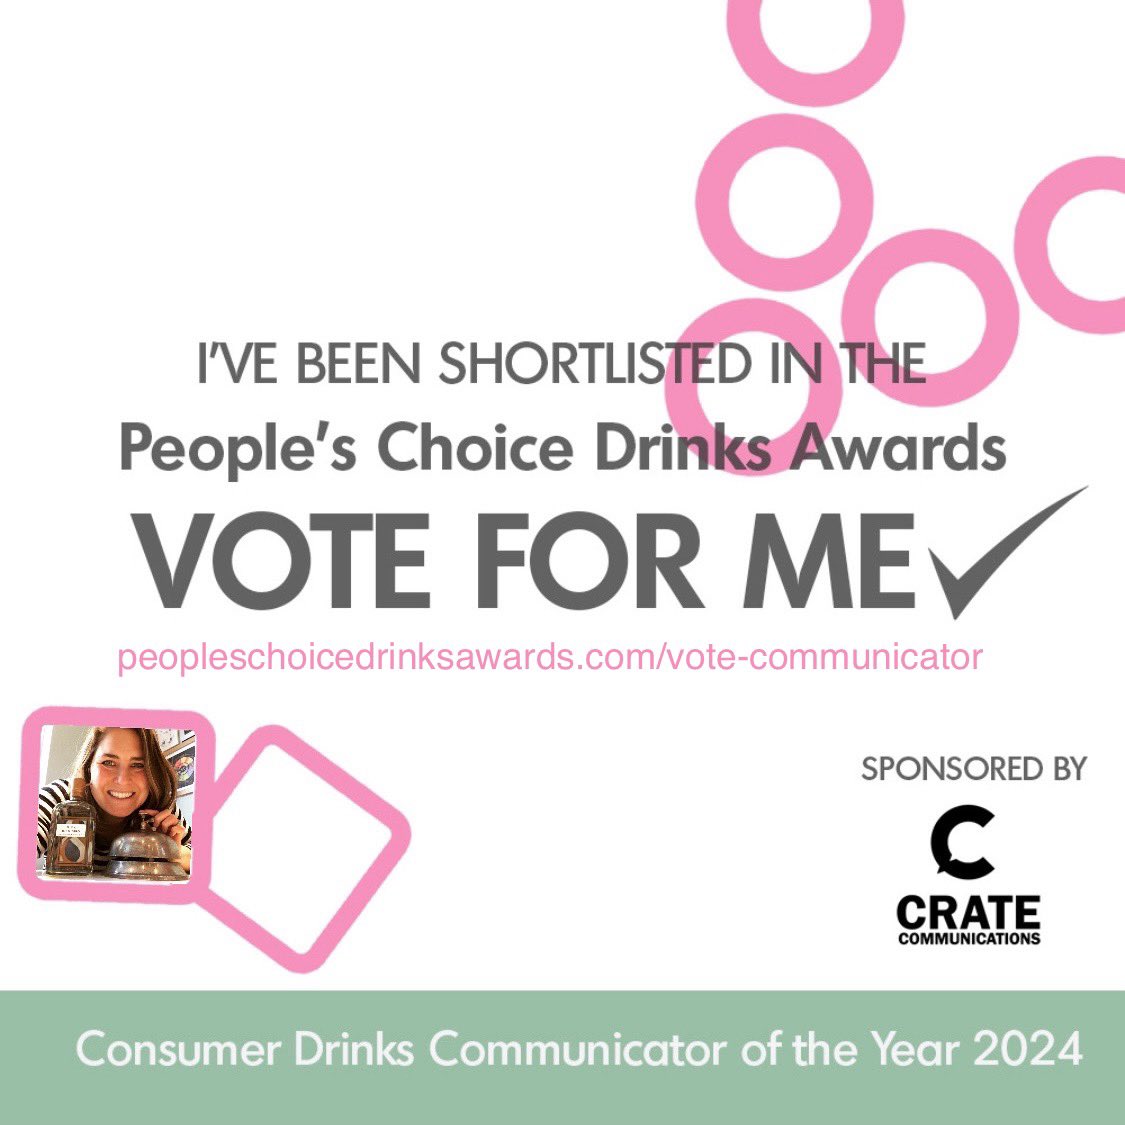 ❗️A little reminder that voting in the People's Choice Drinks Awards closes soon. Winners are decided entirely by public vote so I would really appreciate your support please. ❤️ peopleschoicedrinksawards.com/vote-communica… #PCDrinksAwards